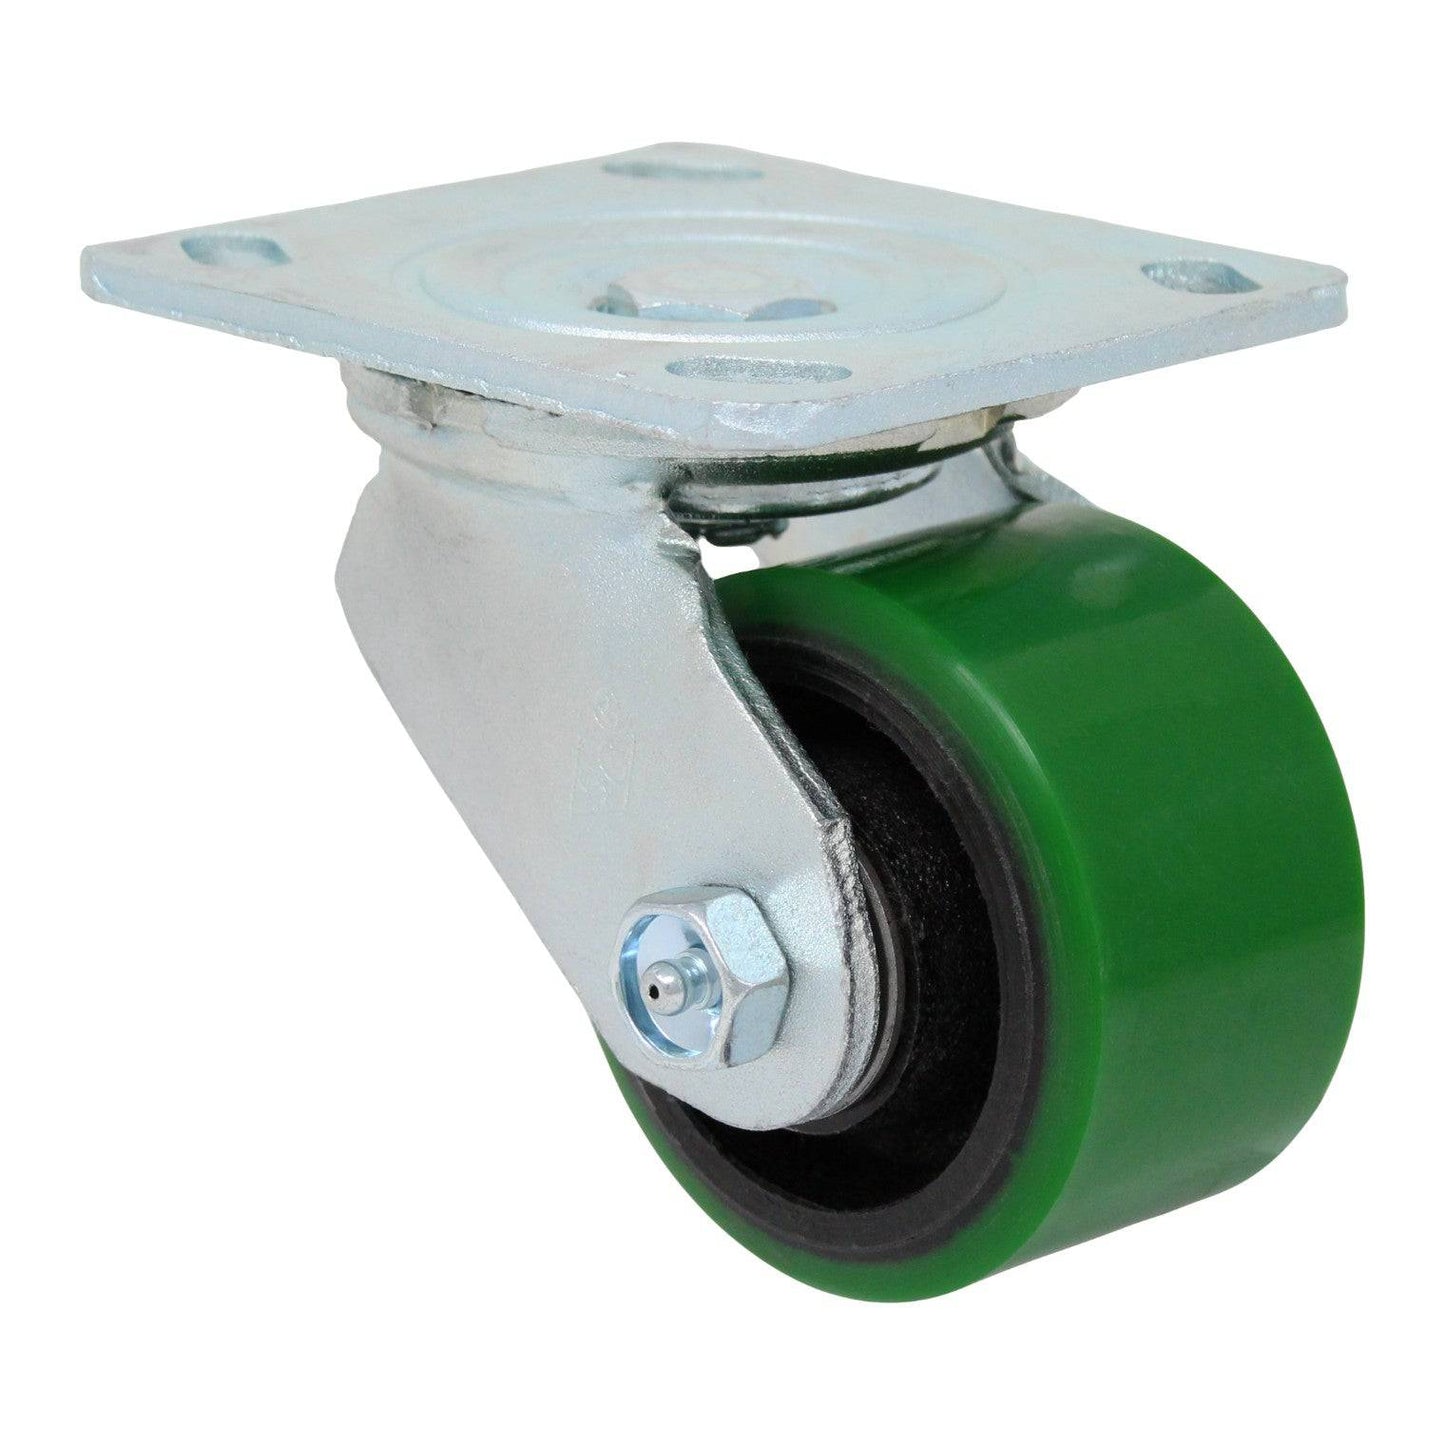 3-1/4" x 2" Polyon Cast Wheel Swivel Caster - 500 lbs. Capacity - Durable Superior Casters